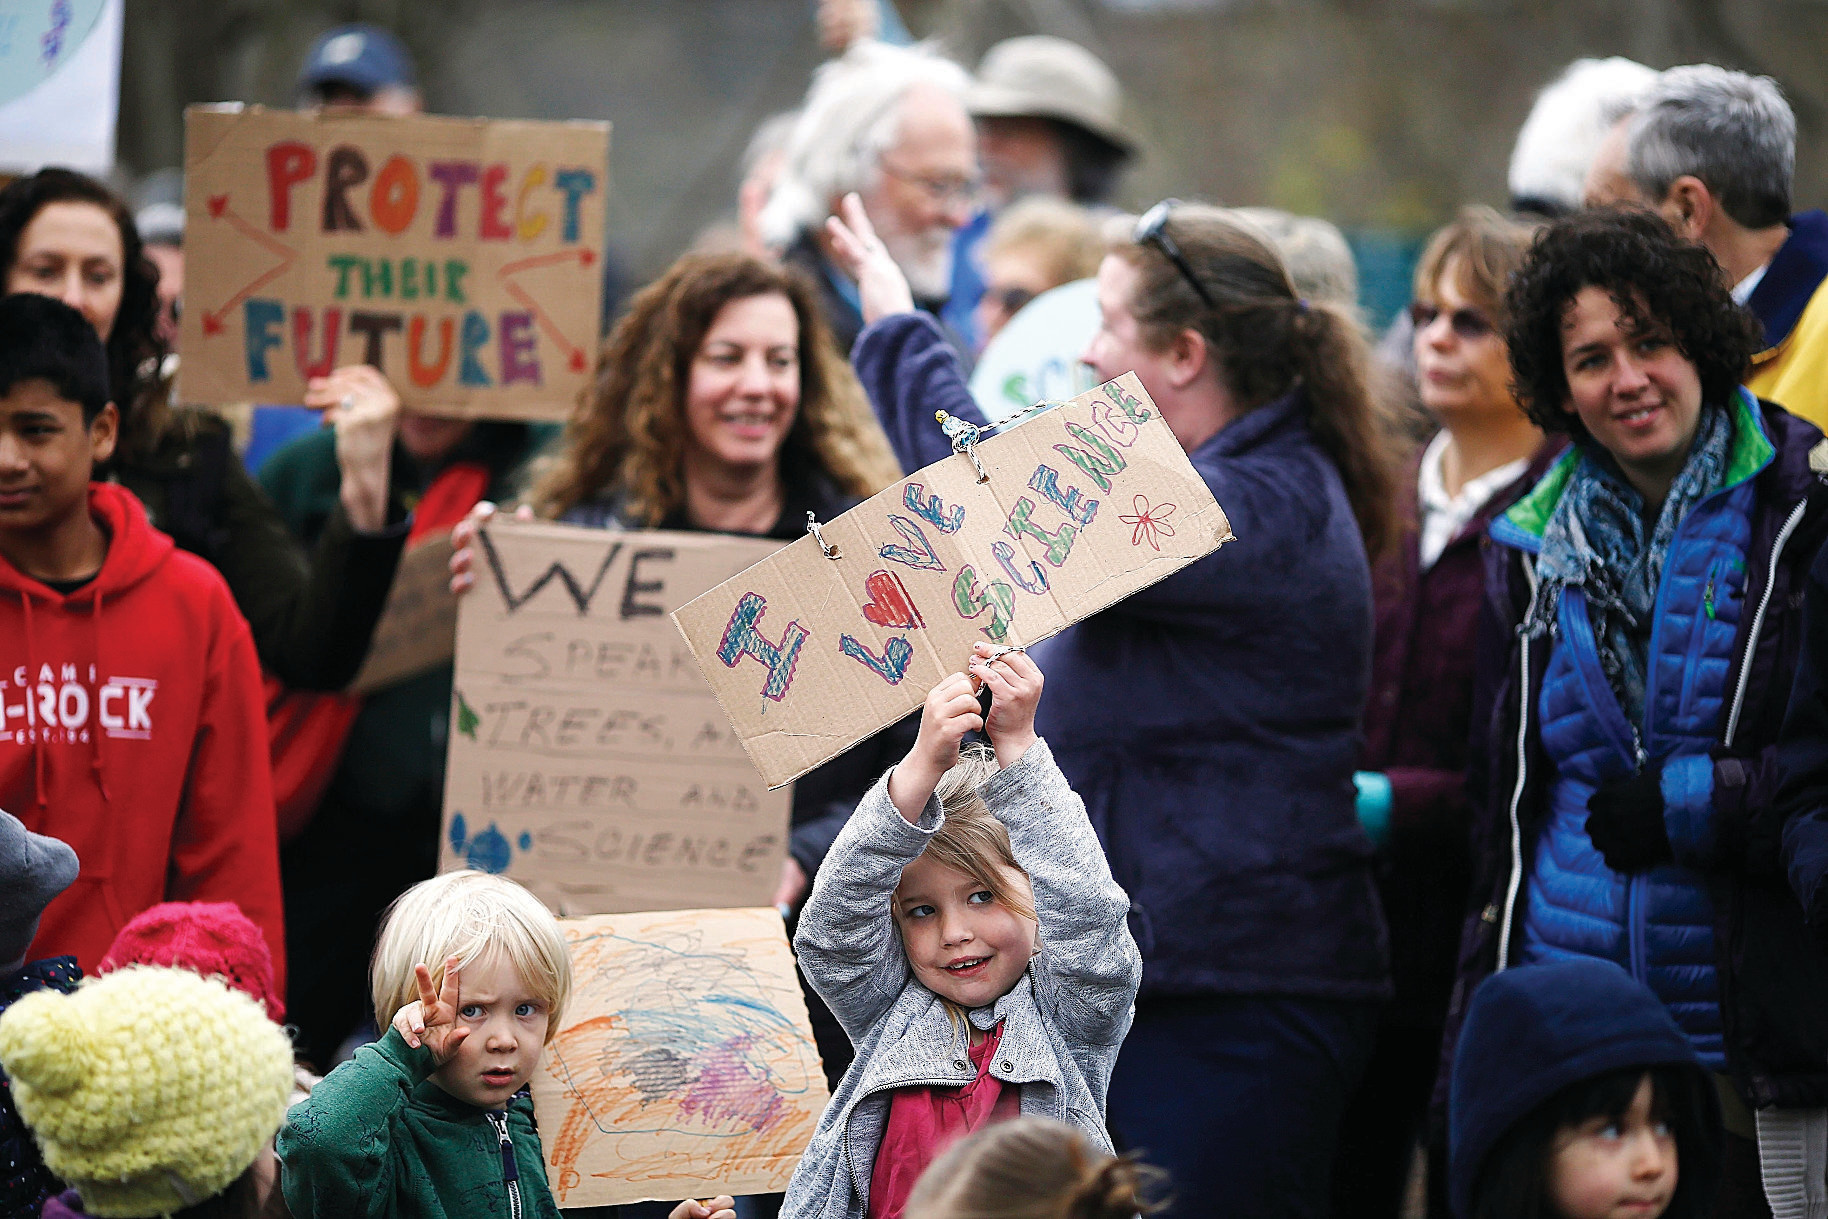 March for Science 2018 at Housatonic River Walk in Great Barrington, MA